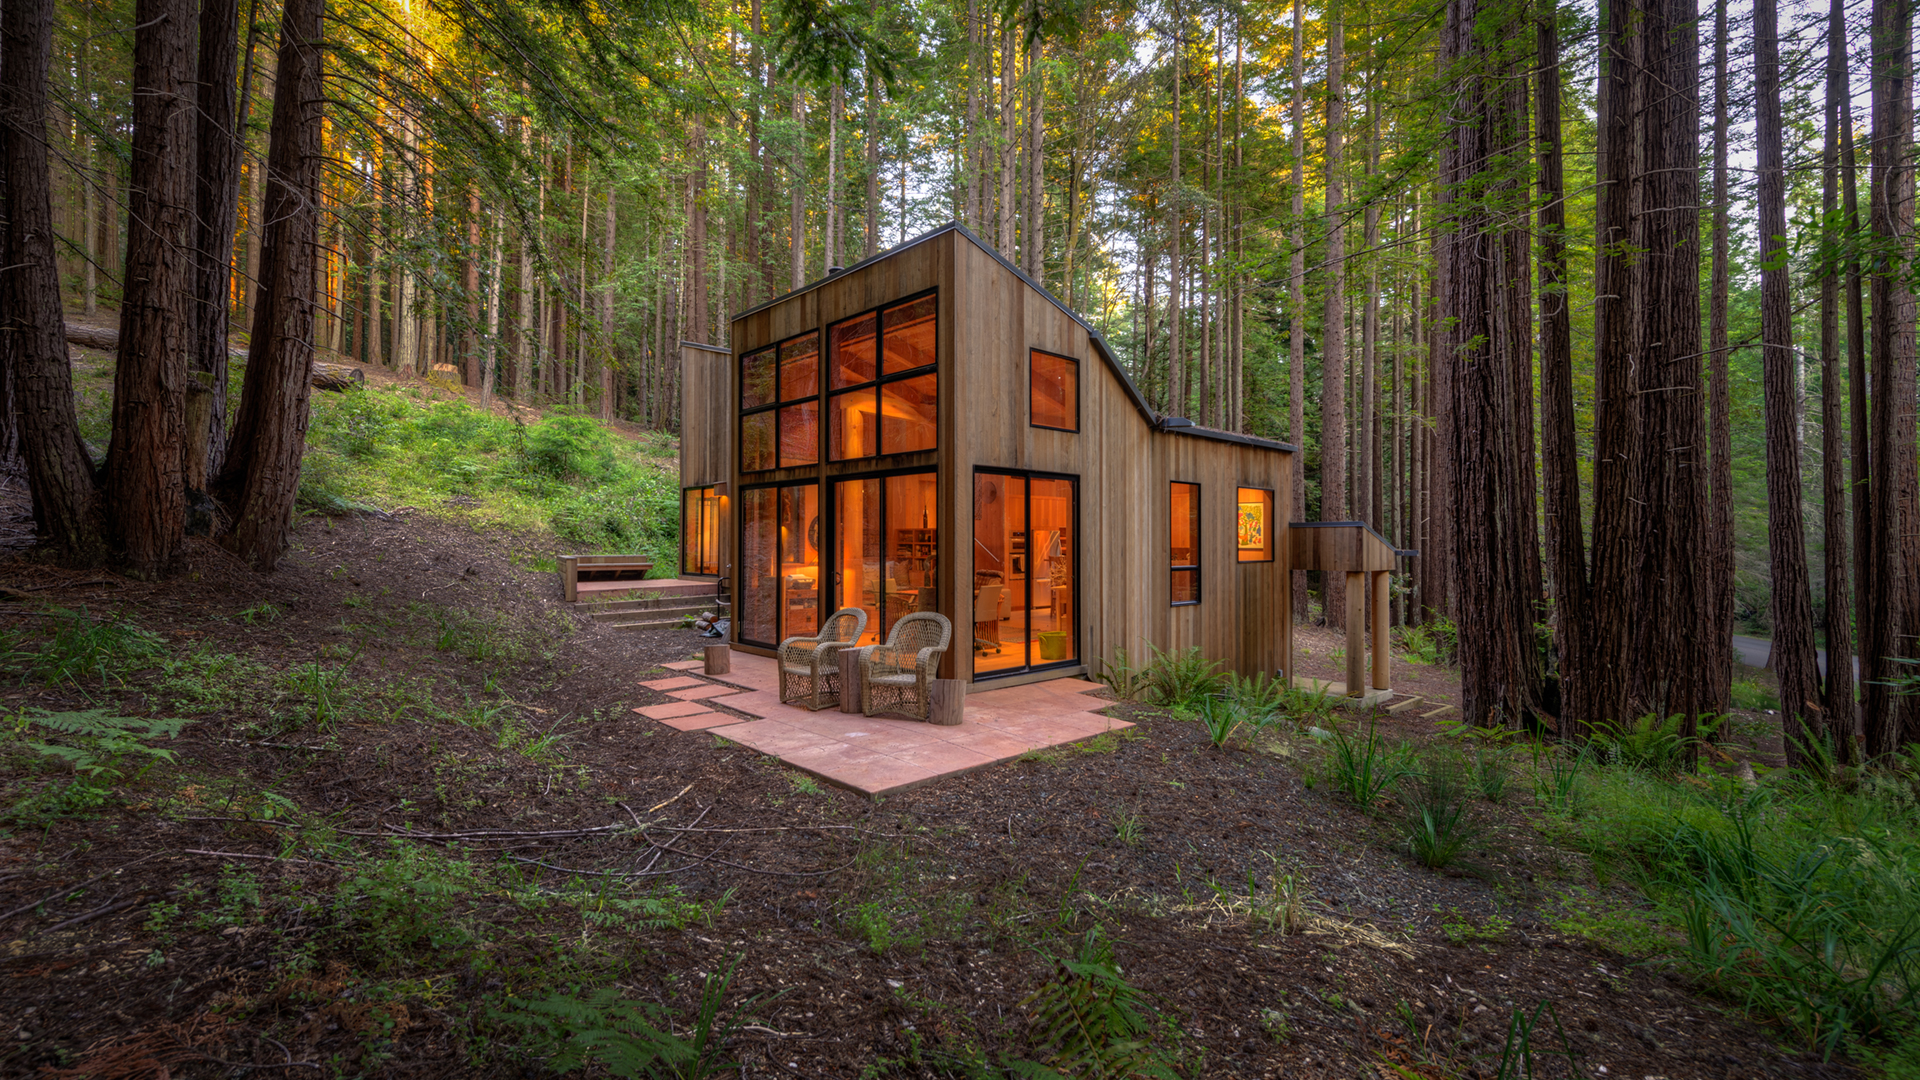 Sea Ranch Home amidst Majestic Redwoods